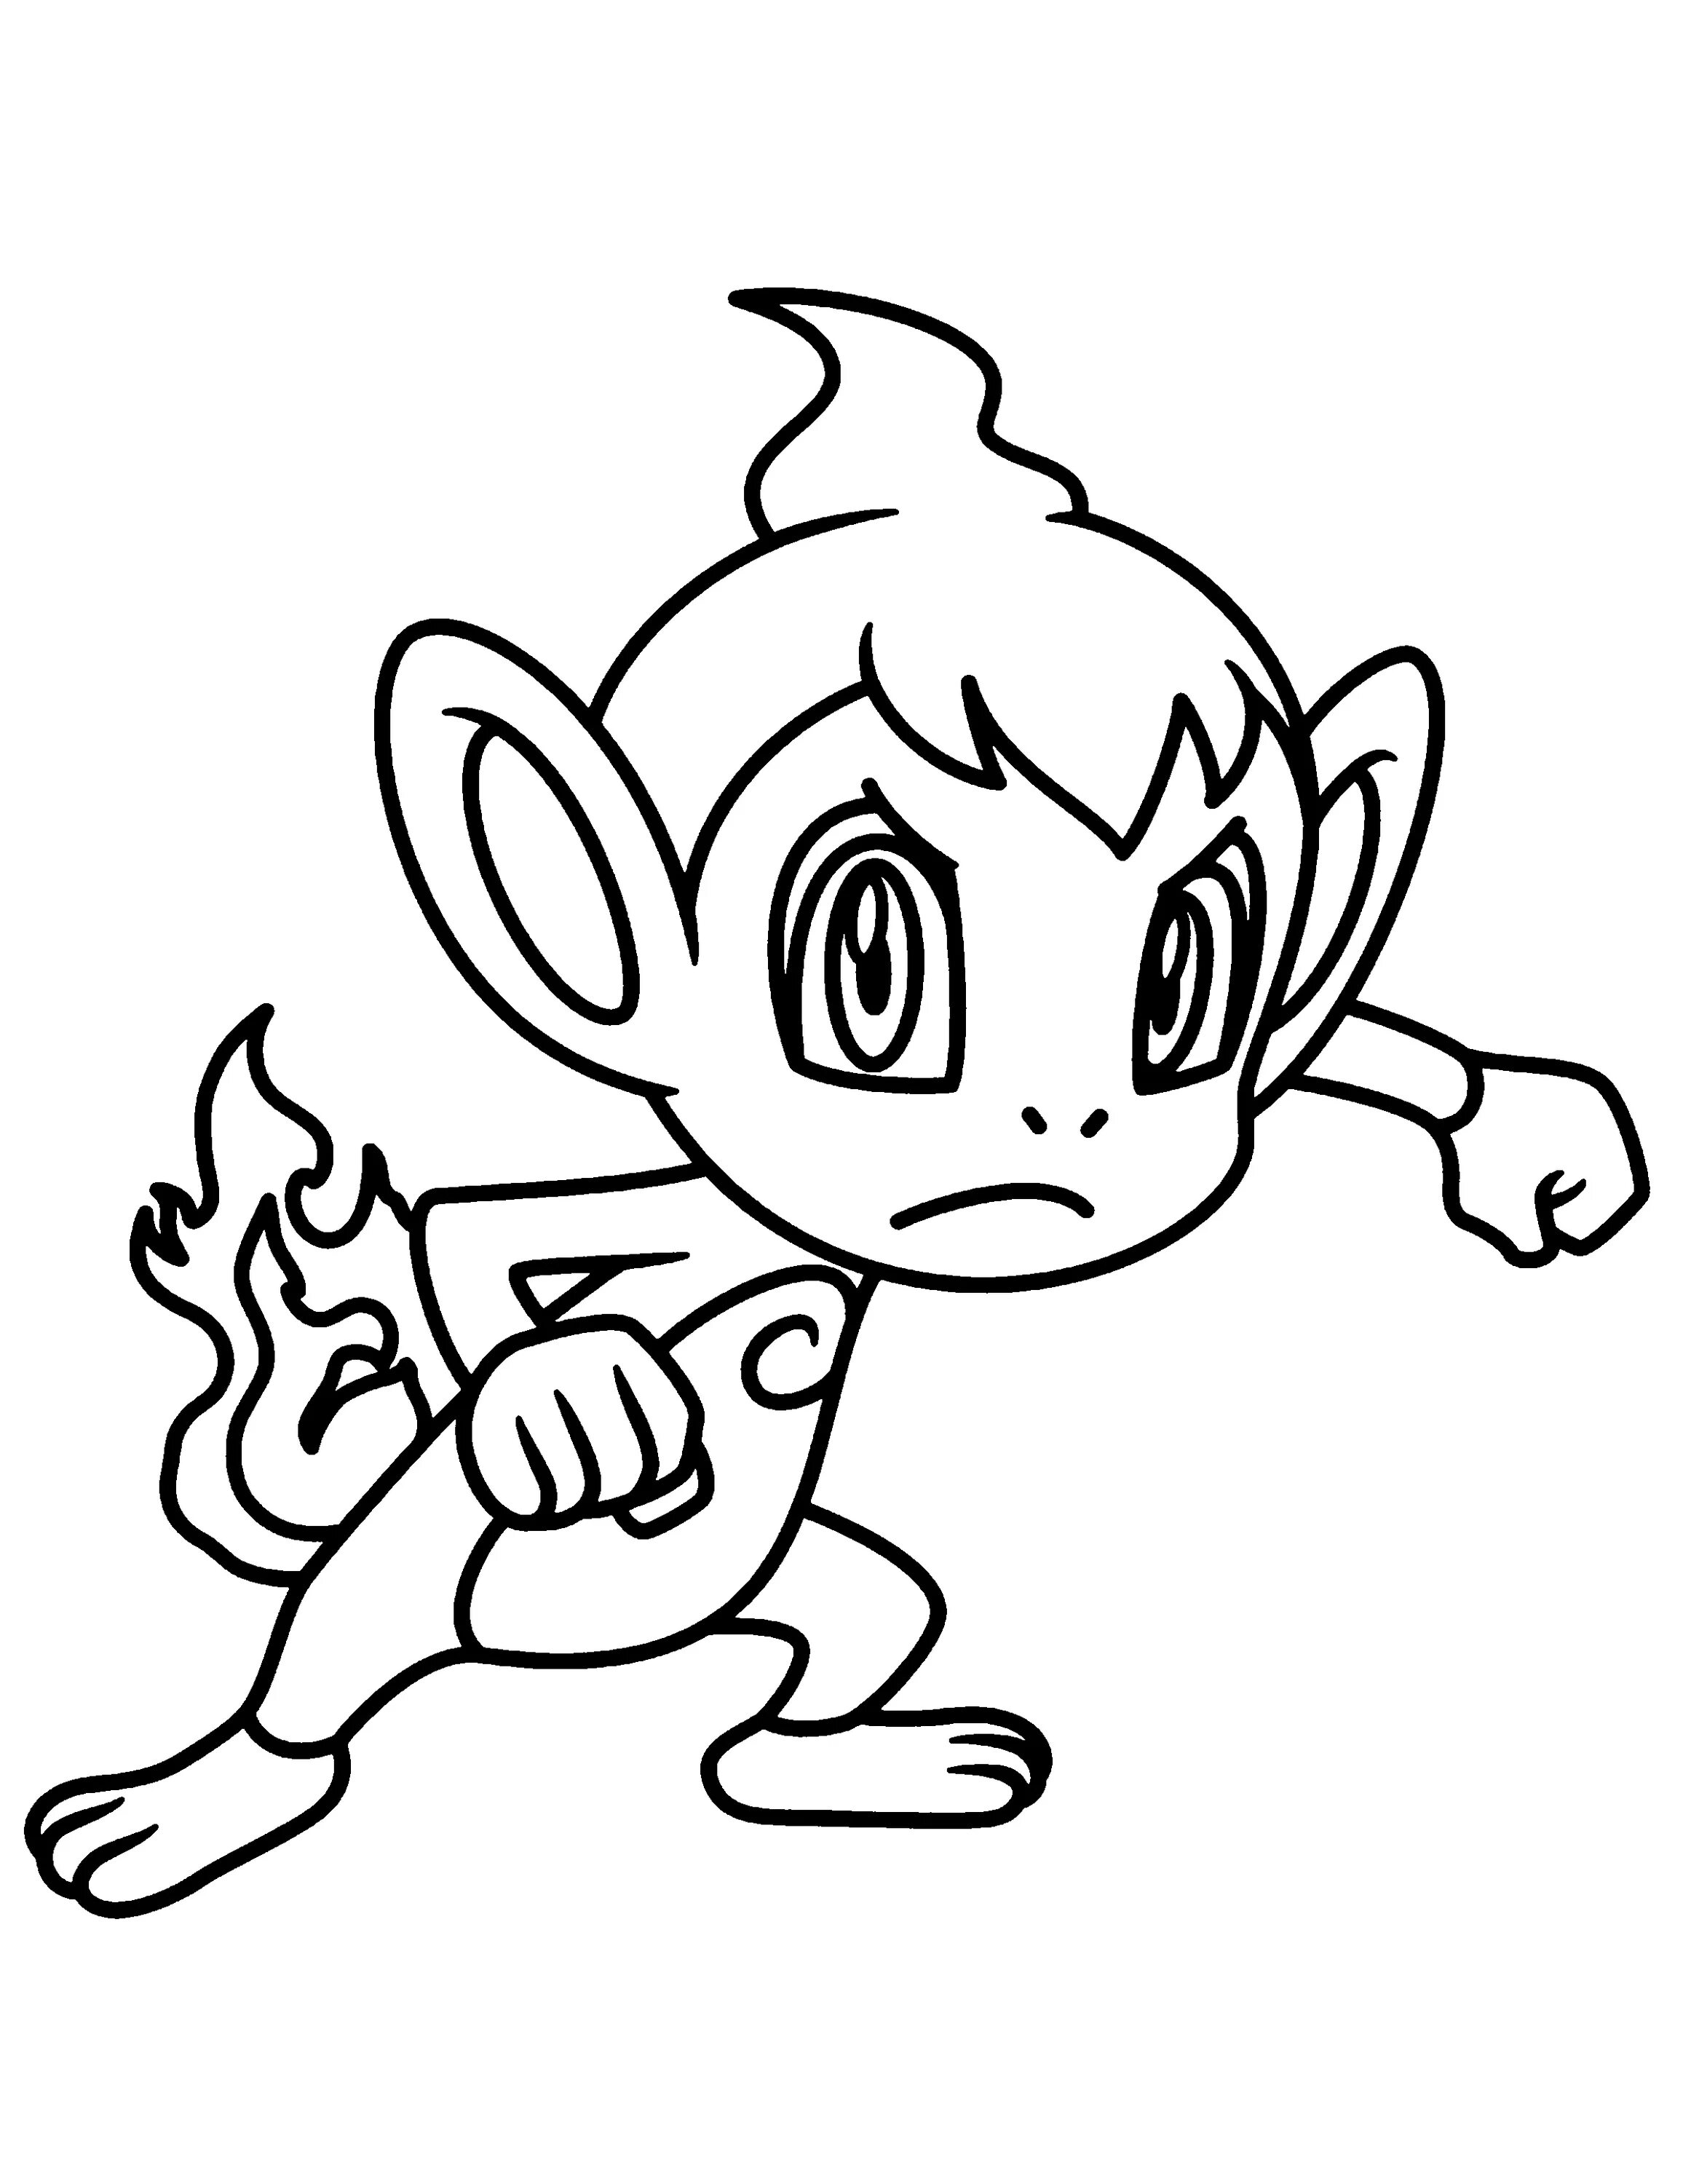 Coloring book shining chimchar